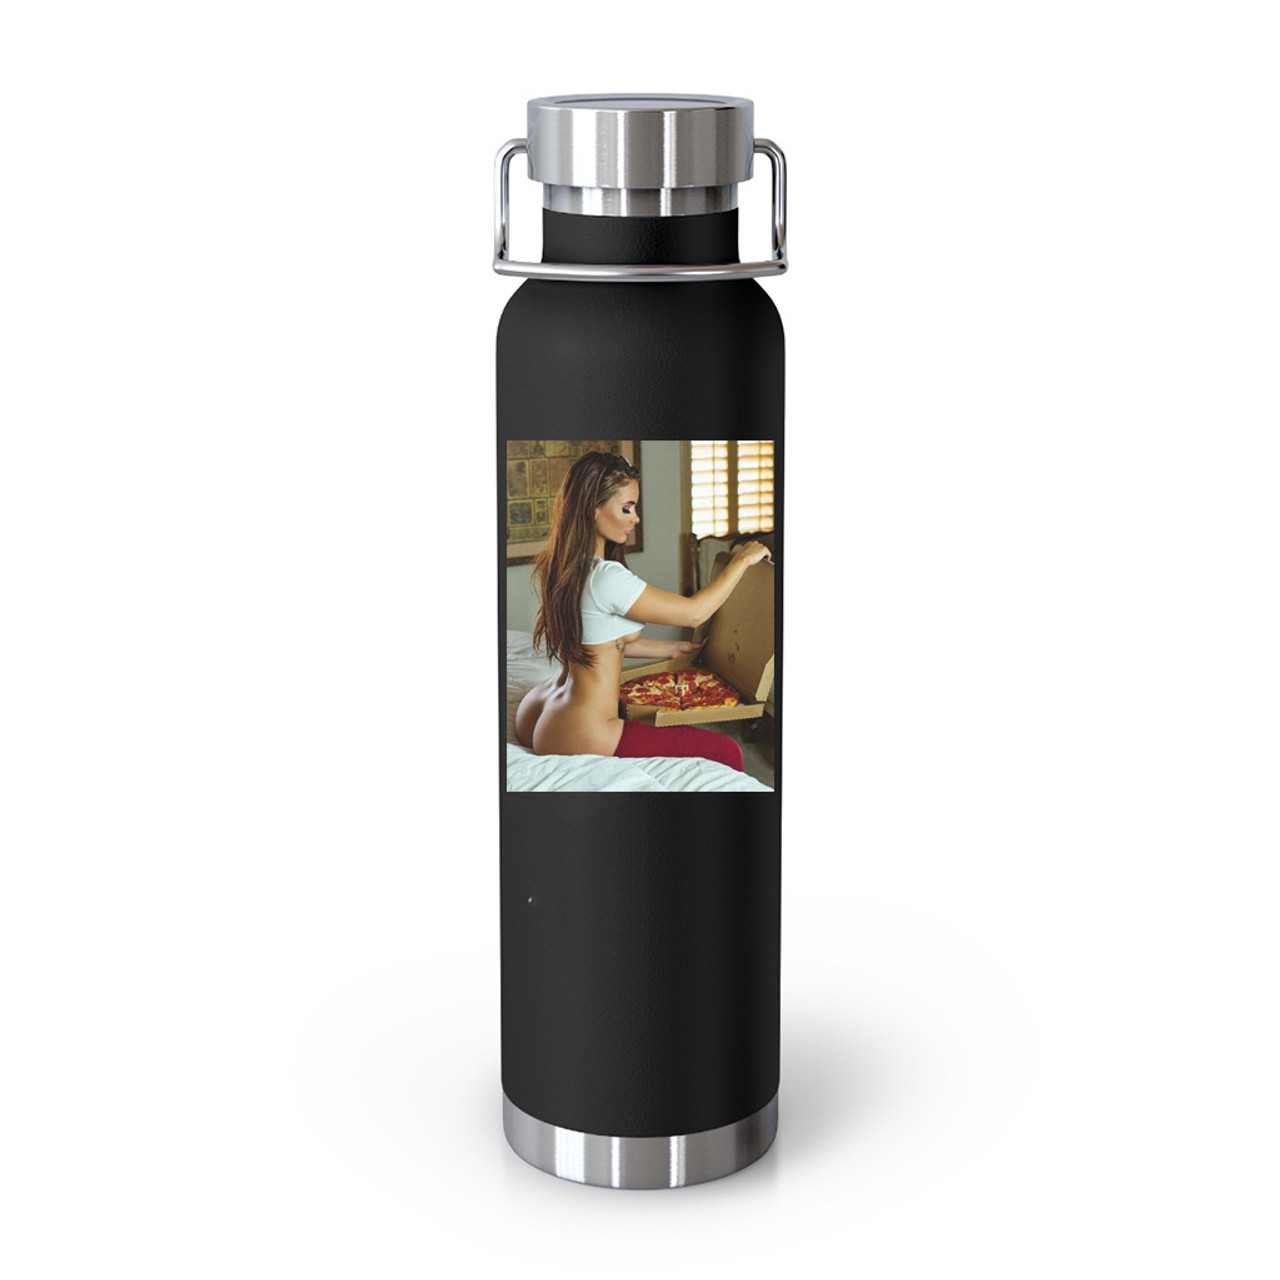 brittney mcduffie recommends naked at home tumbler pic